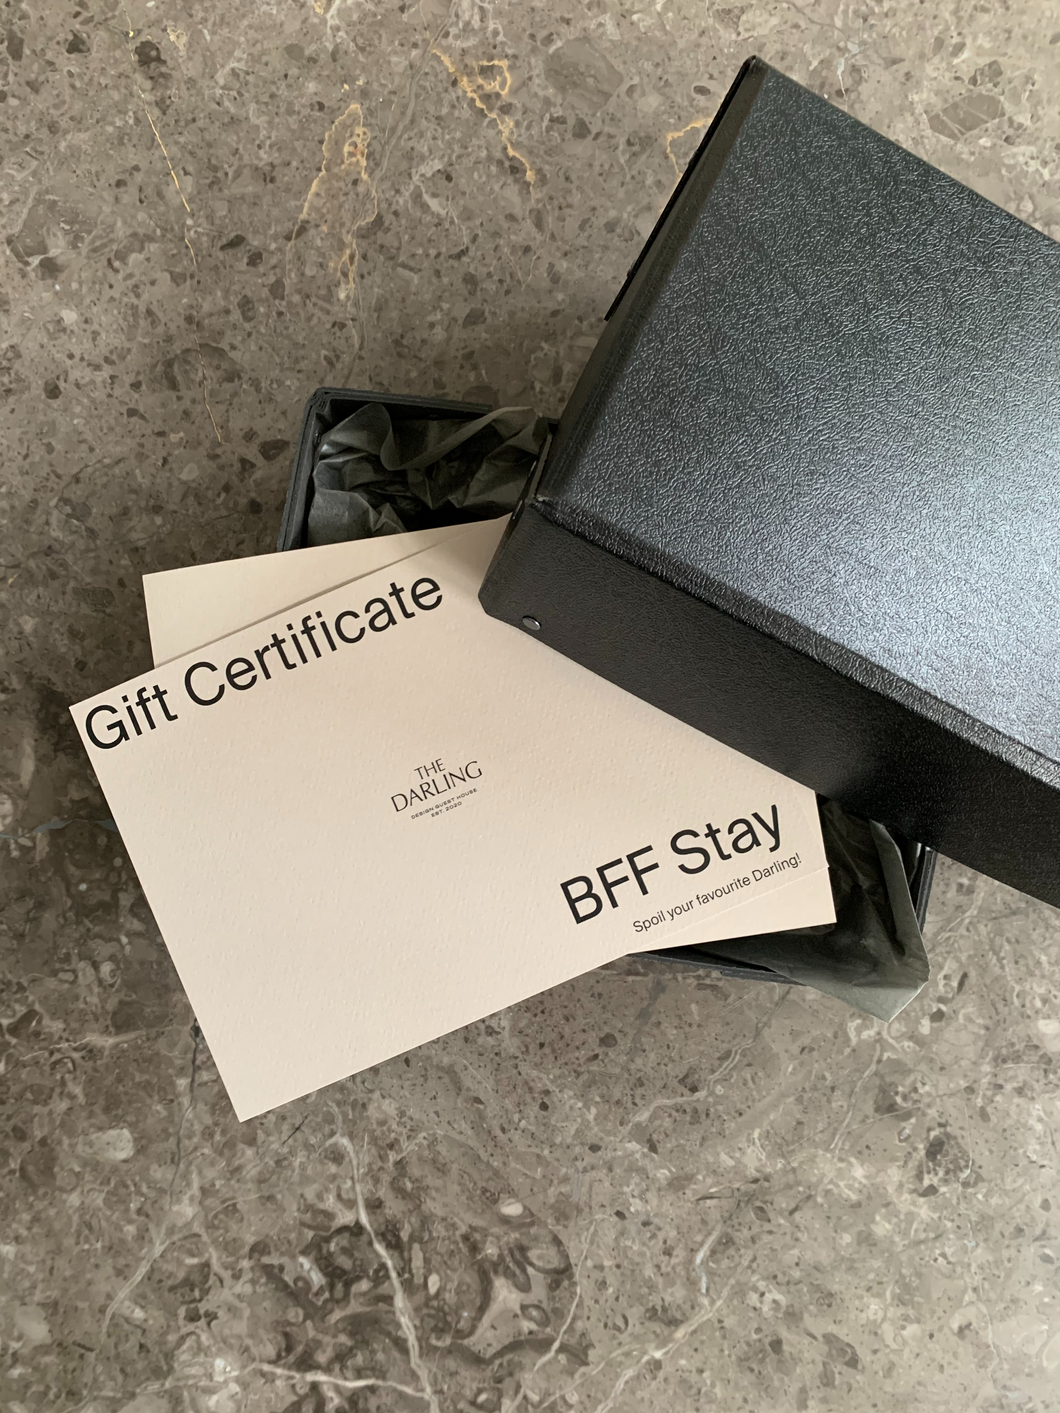 Gift Certificate, BFF Stay